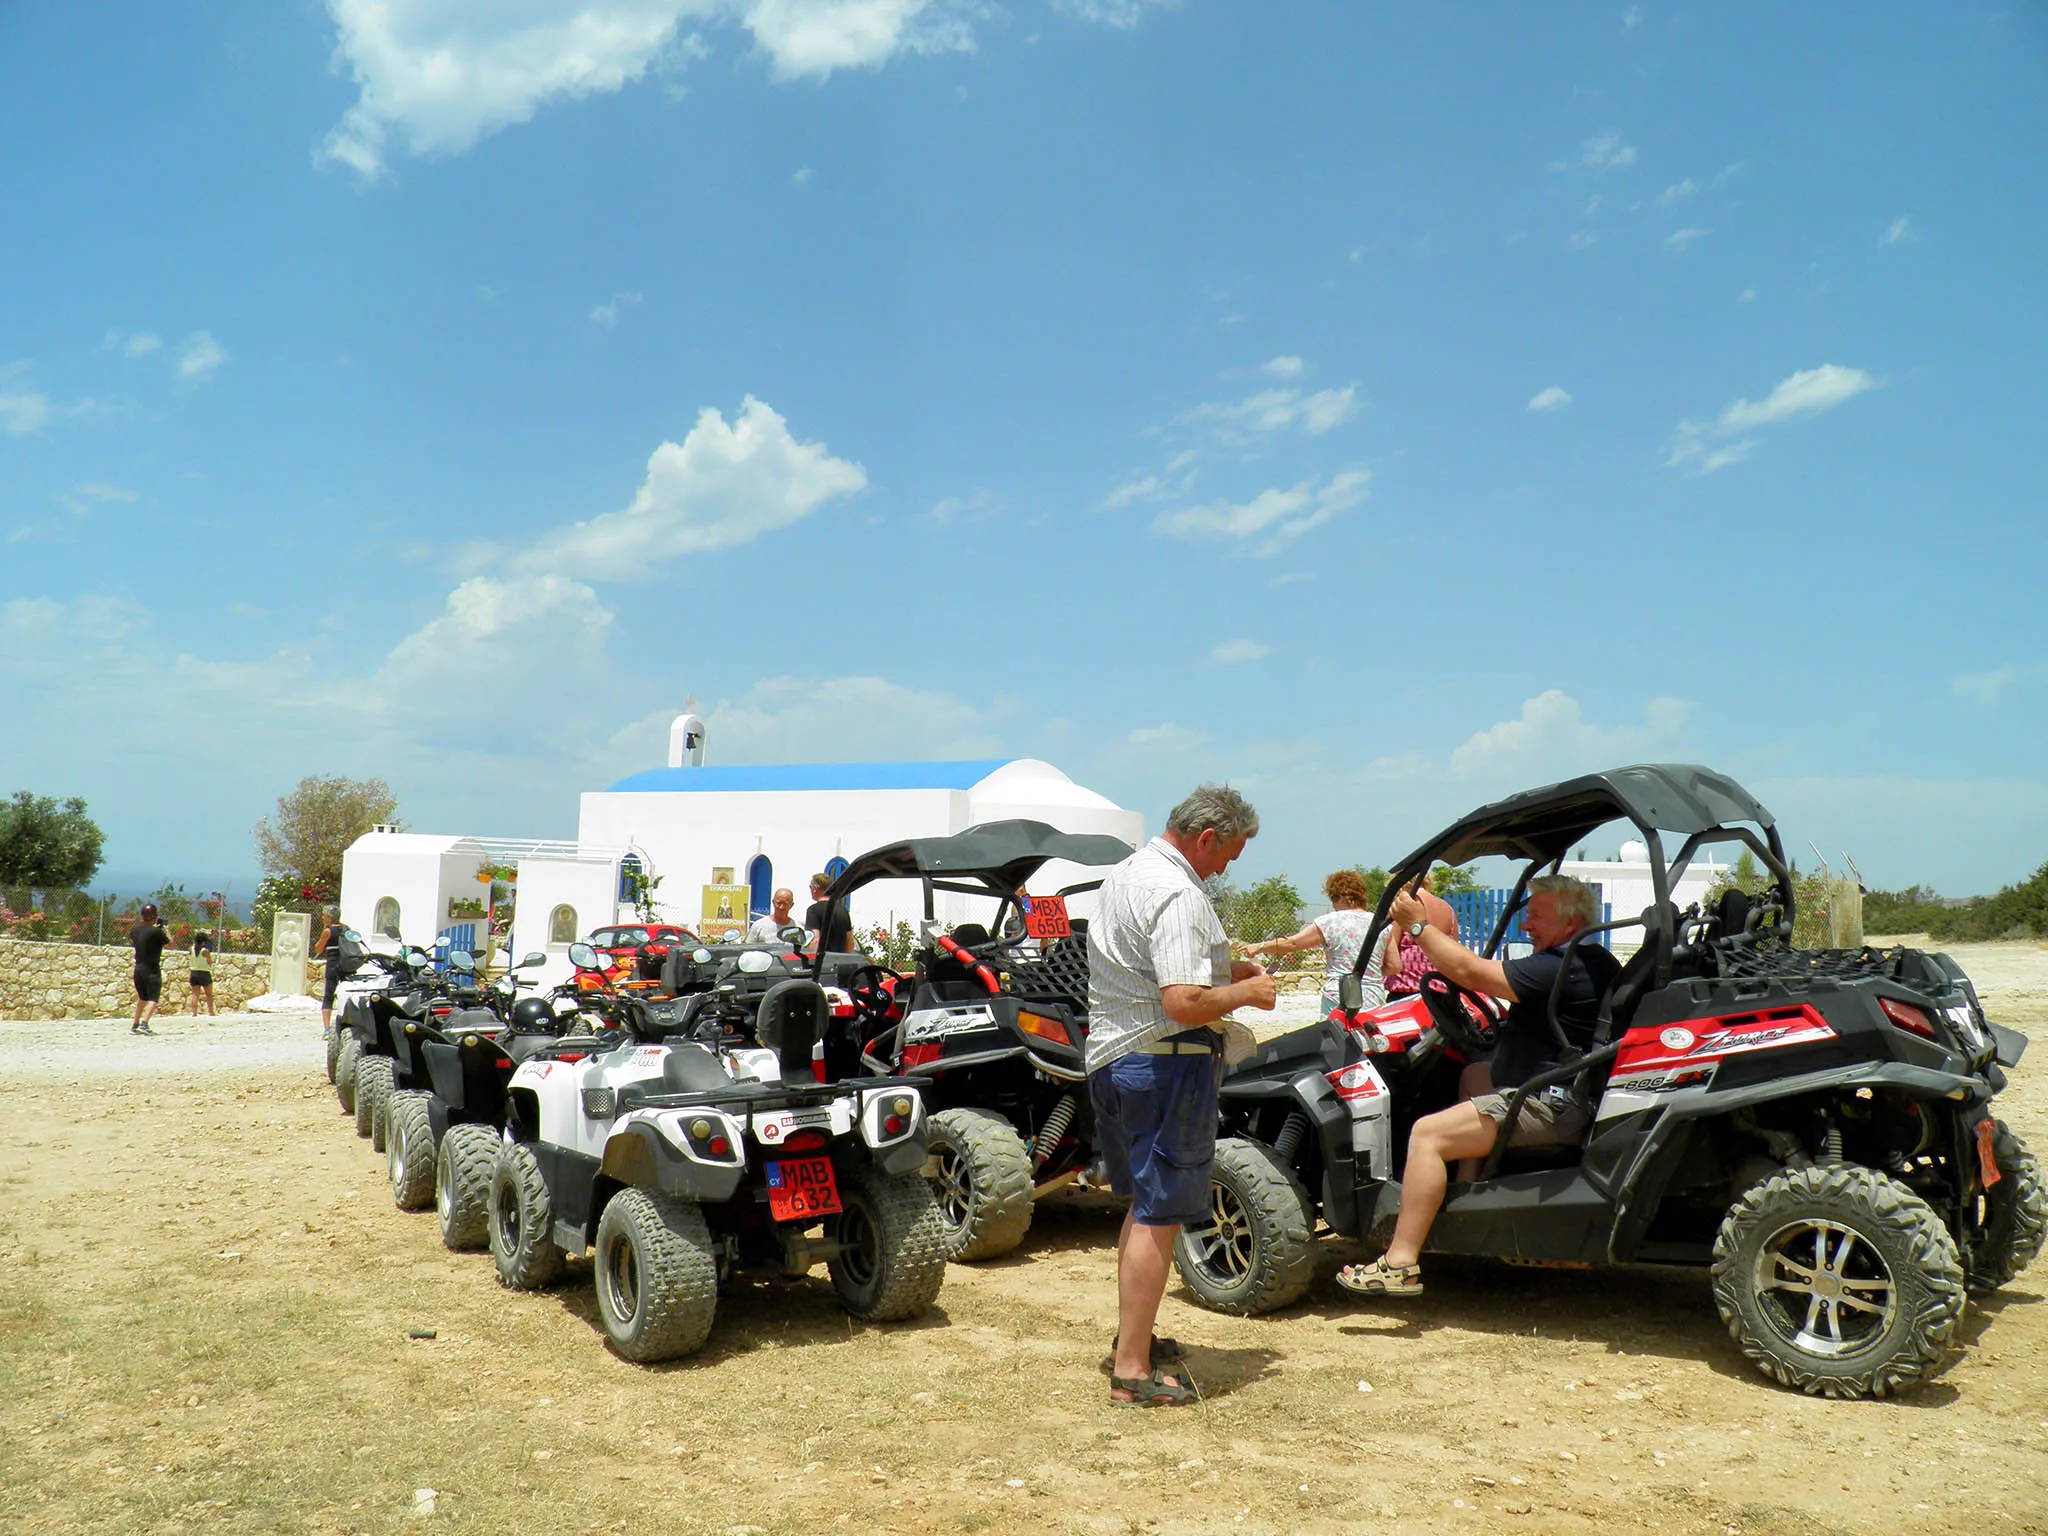 Steve's ATV Rentals in USA, North America | ATVs - Rated 3.6